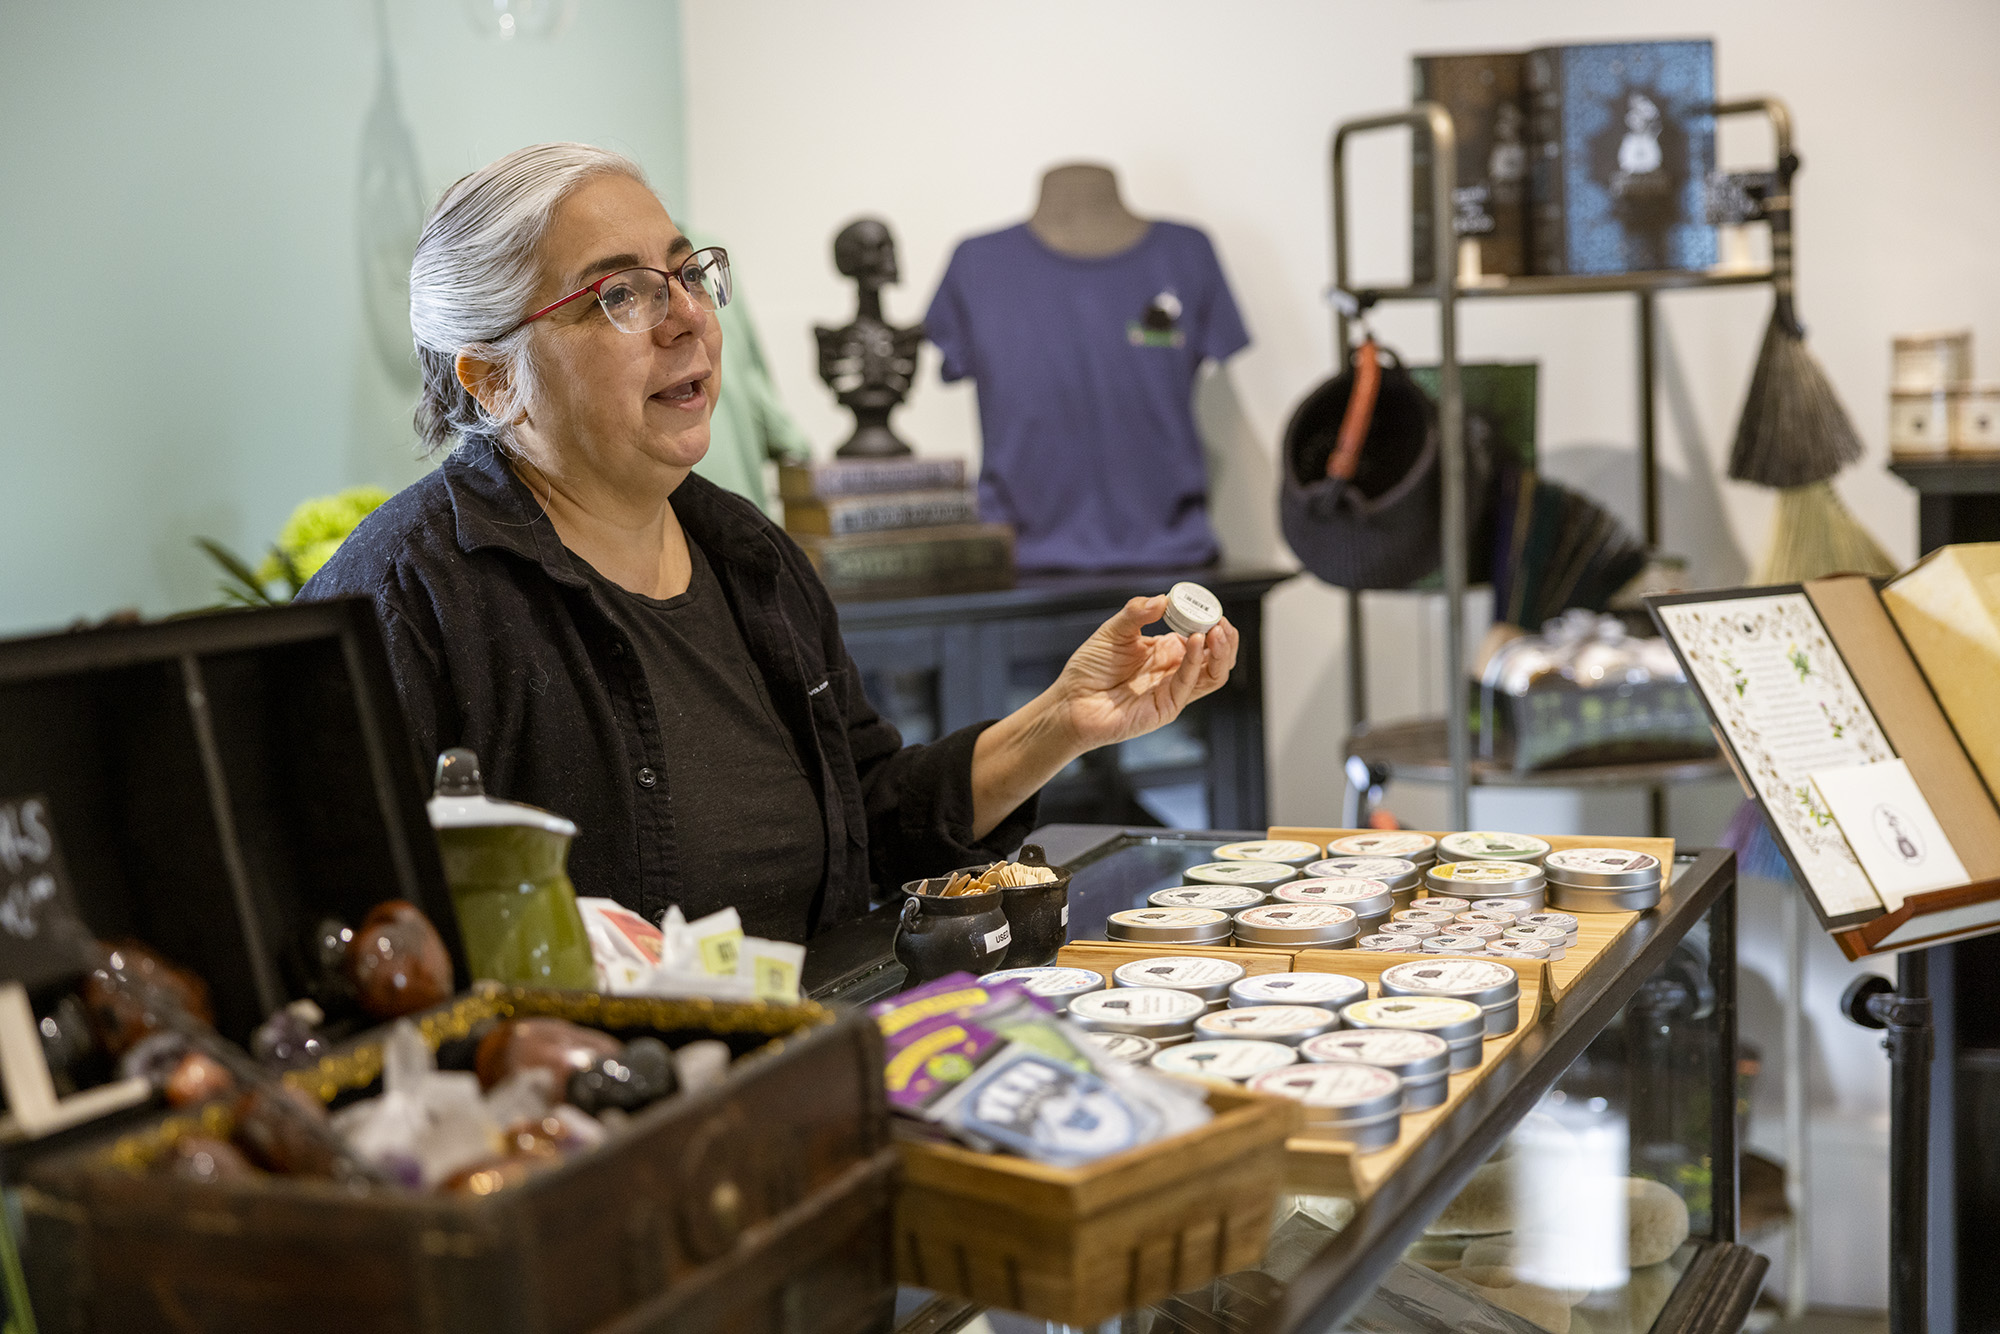 Owner and founder of Soap Cauldron, Emma Mann, standing behind retail counter with product tester in hand.